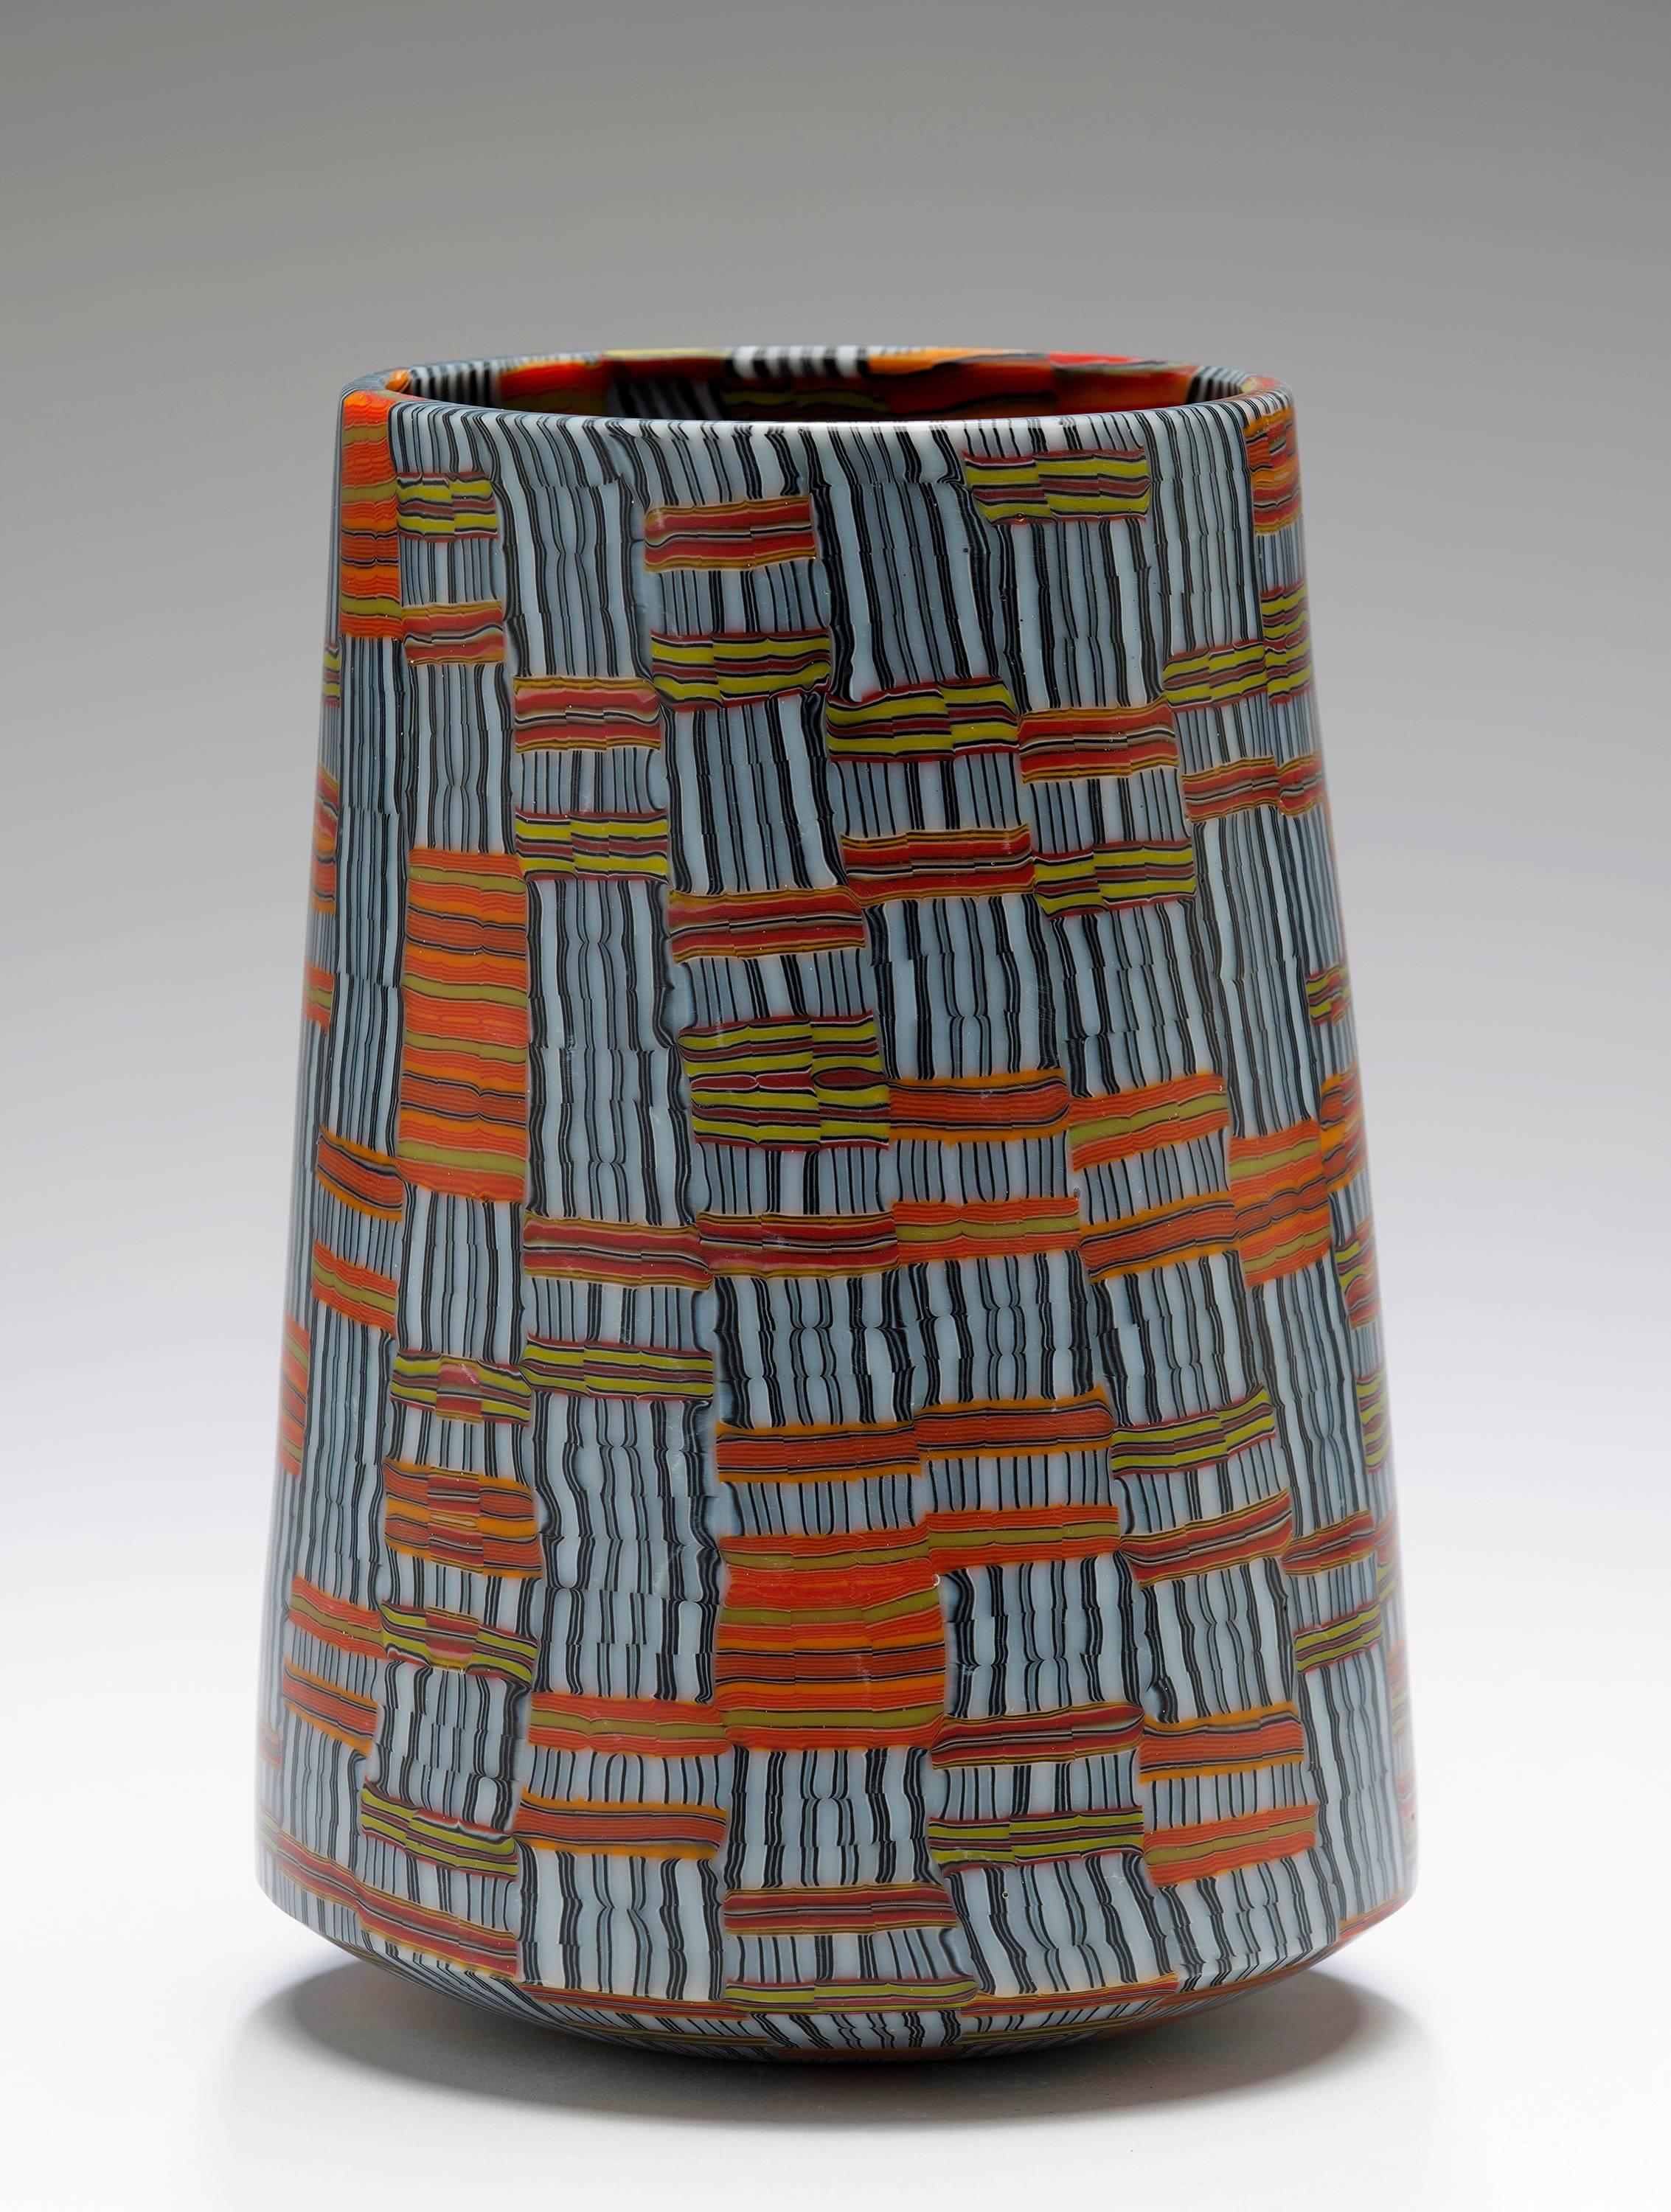 Textile 2014 is a glass vessel by glass artist Giles Bettison.

Giles Bettison is a master glass artist from Adelaide, SA, Australia. He has evolved the ancient Venetian technique called “Murrini” or mosaic glass to construct patterned sheets from